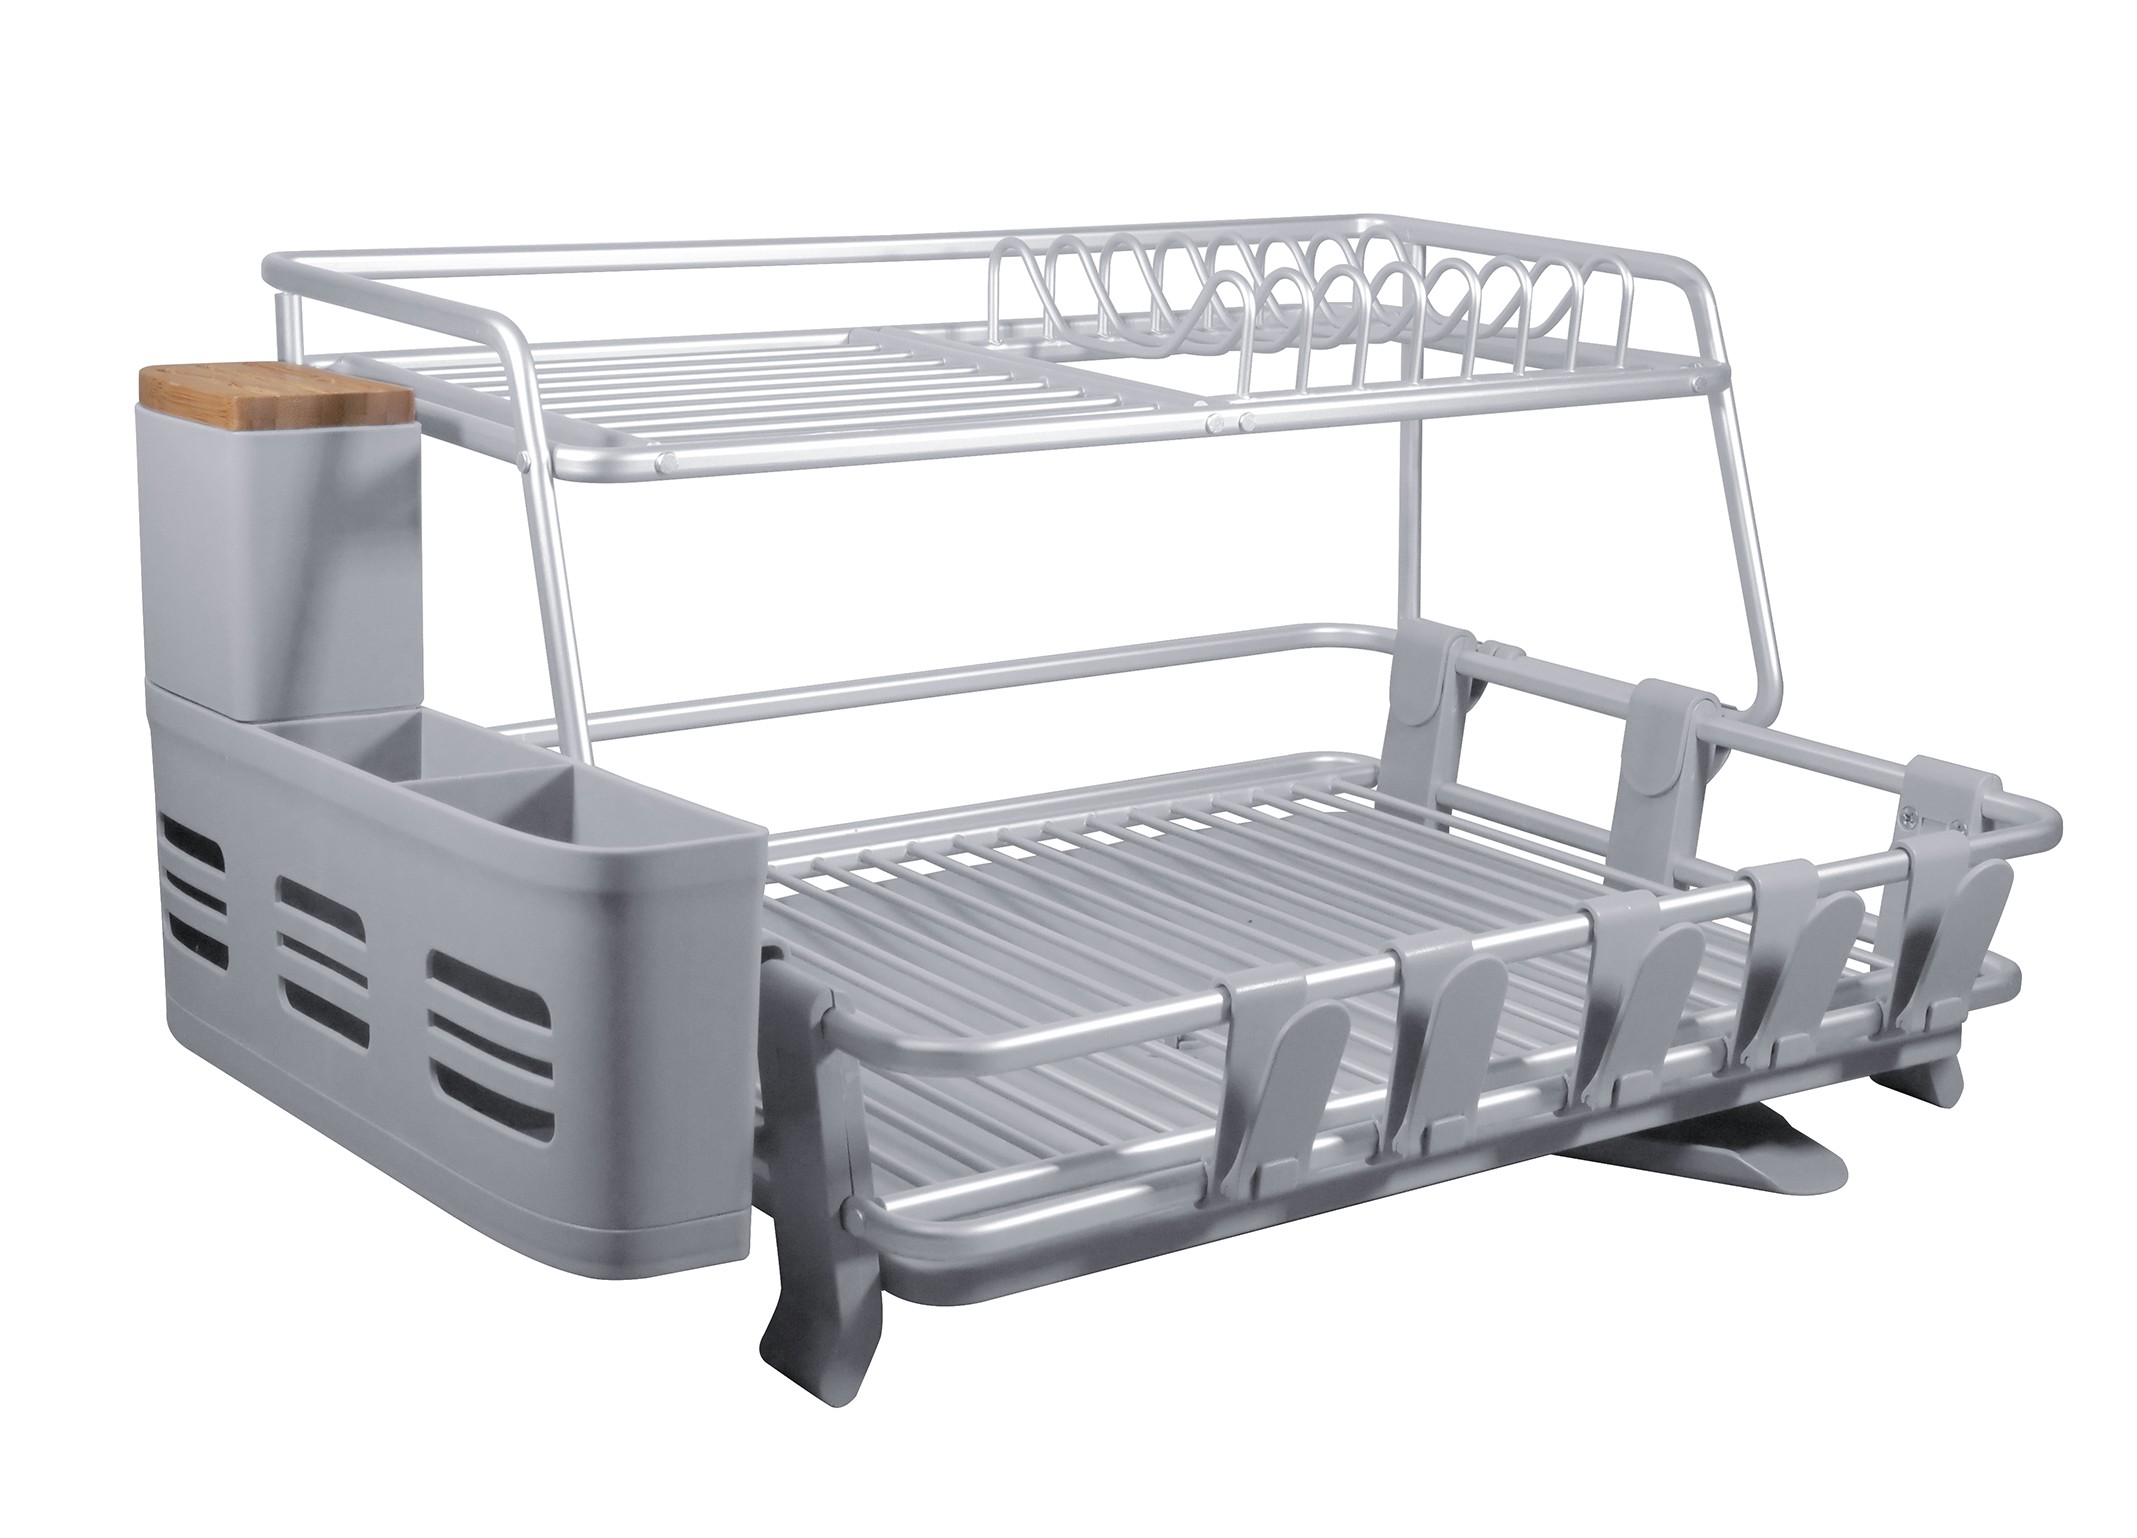 CozyBlock Aluminum 2-tier Dish Drying Rack with Utensil & Wooden